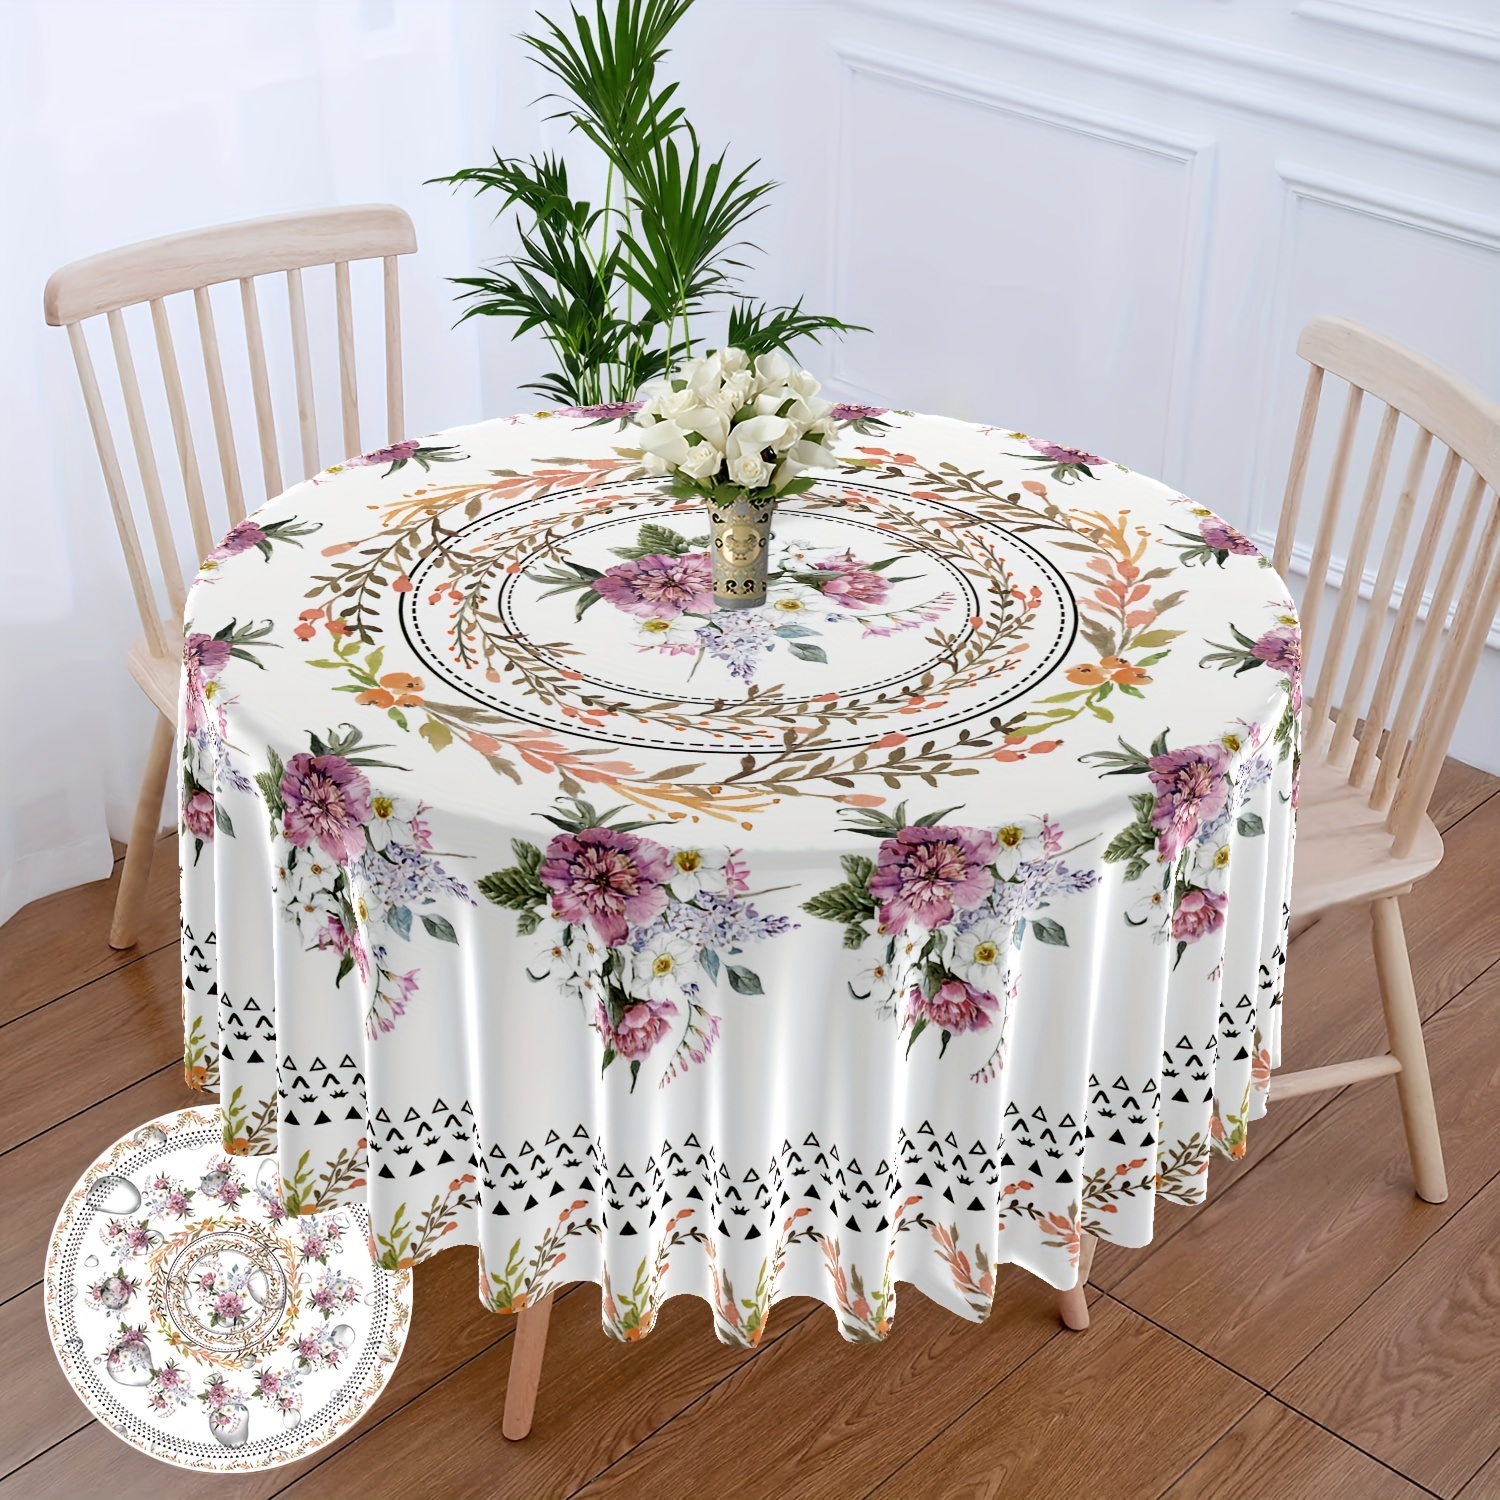 

1pc, Round Table Cloth, Bright Large Flower Pattern Circular Table Cover, Elegant Plant Pattern Dining Table Cover, Multi-purpose Towel, Backyard Barbecue Picnic Mat, Vintage Tablecloth, Room Decor